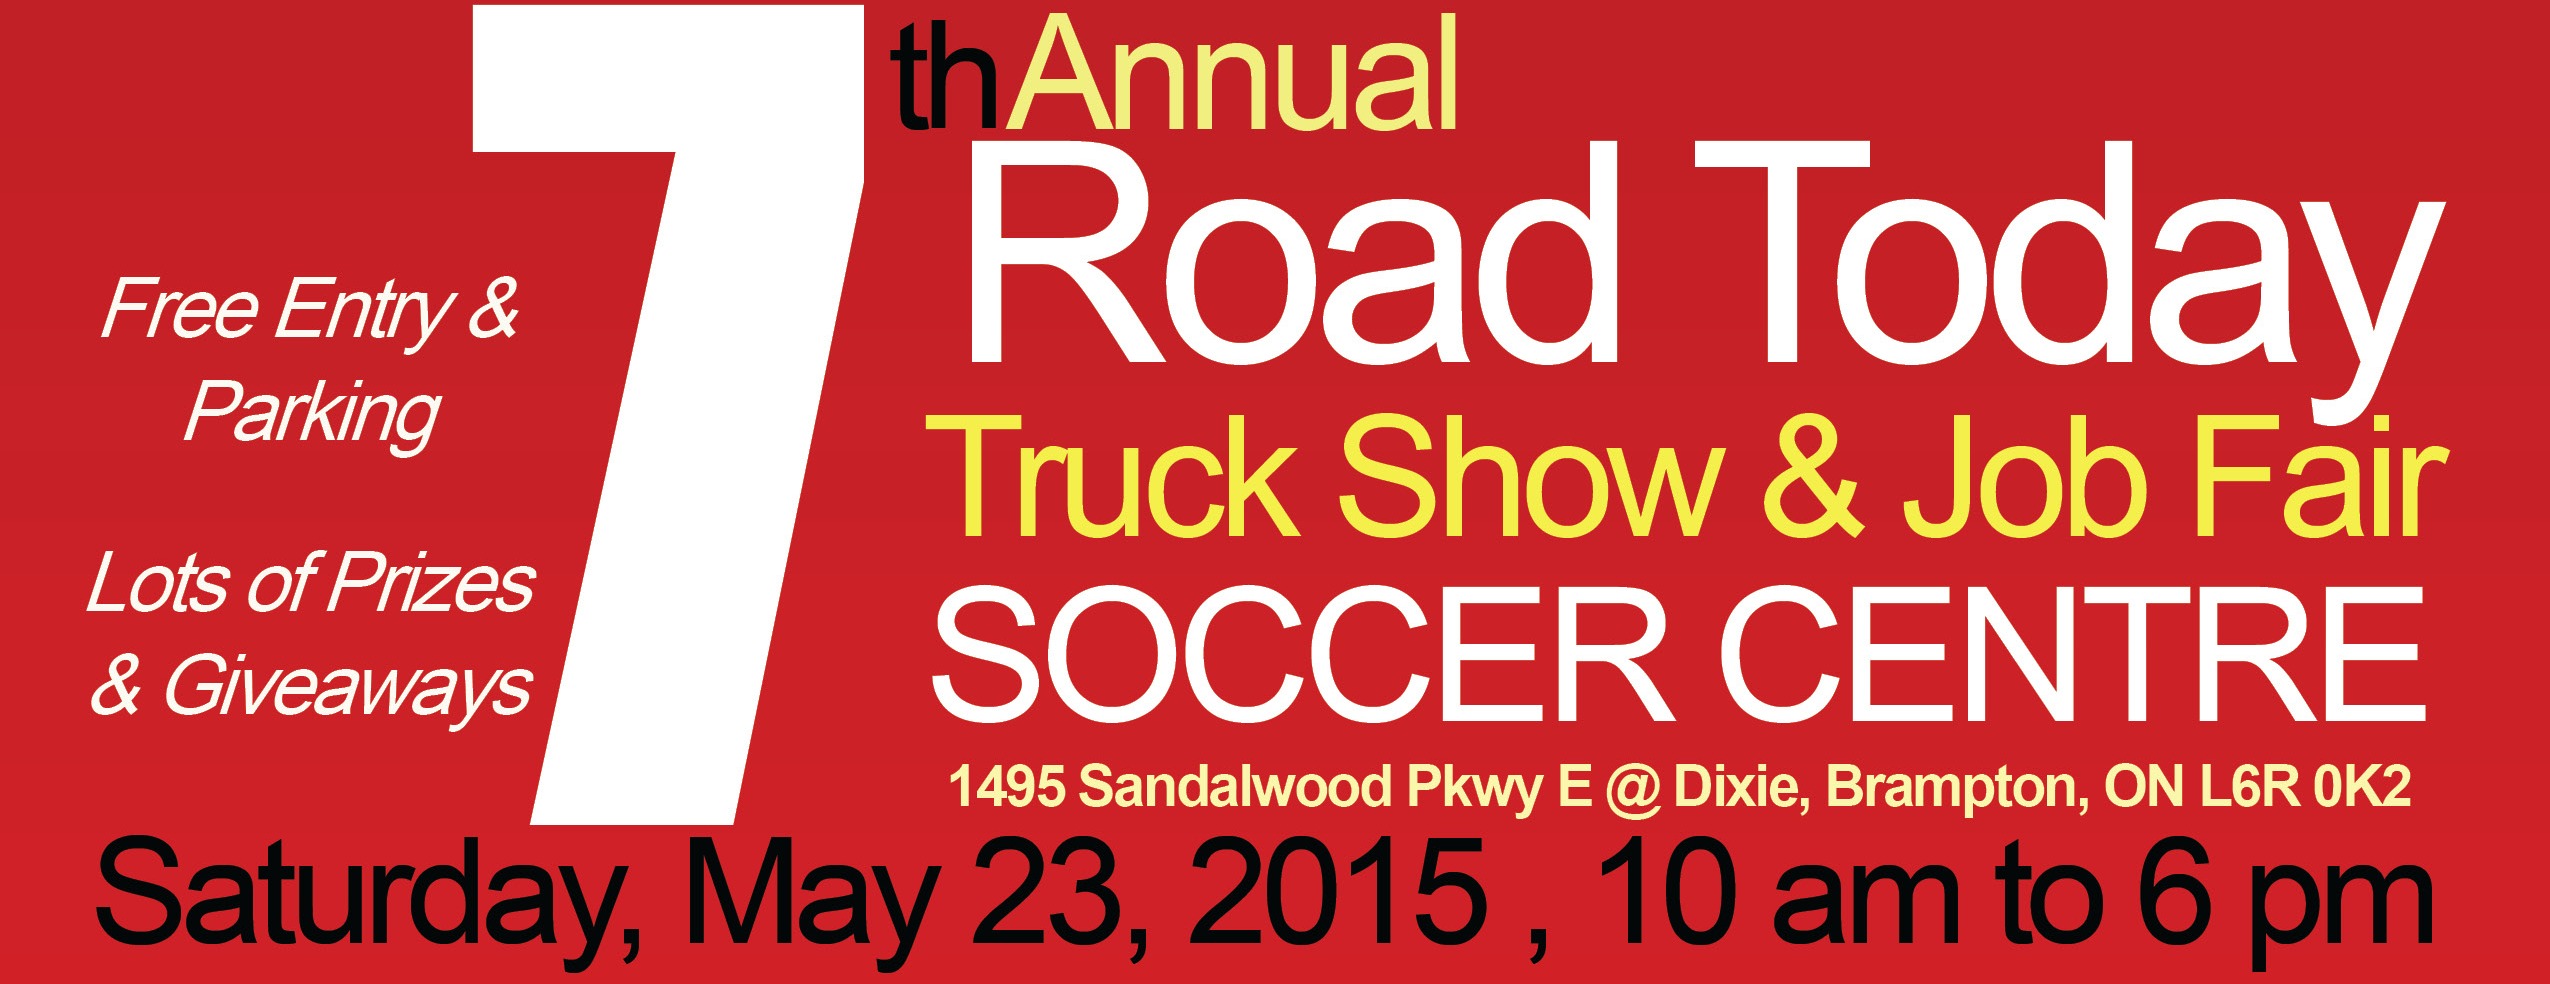 Annual Road Today Show & Job Fair rolls into Brampton on Saturday, May 23rd